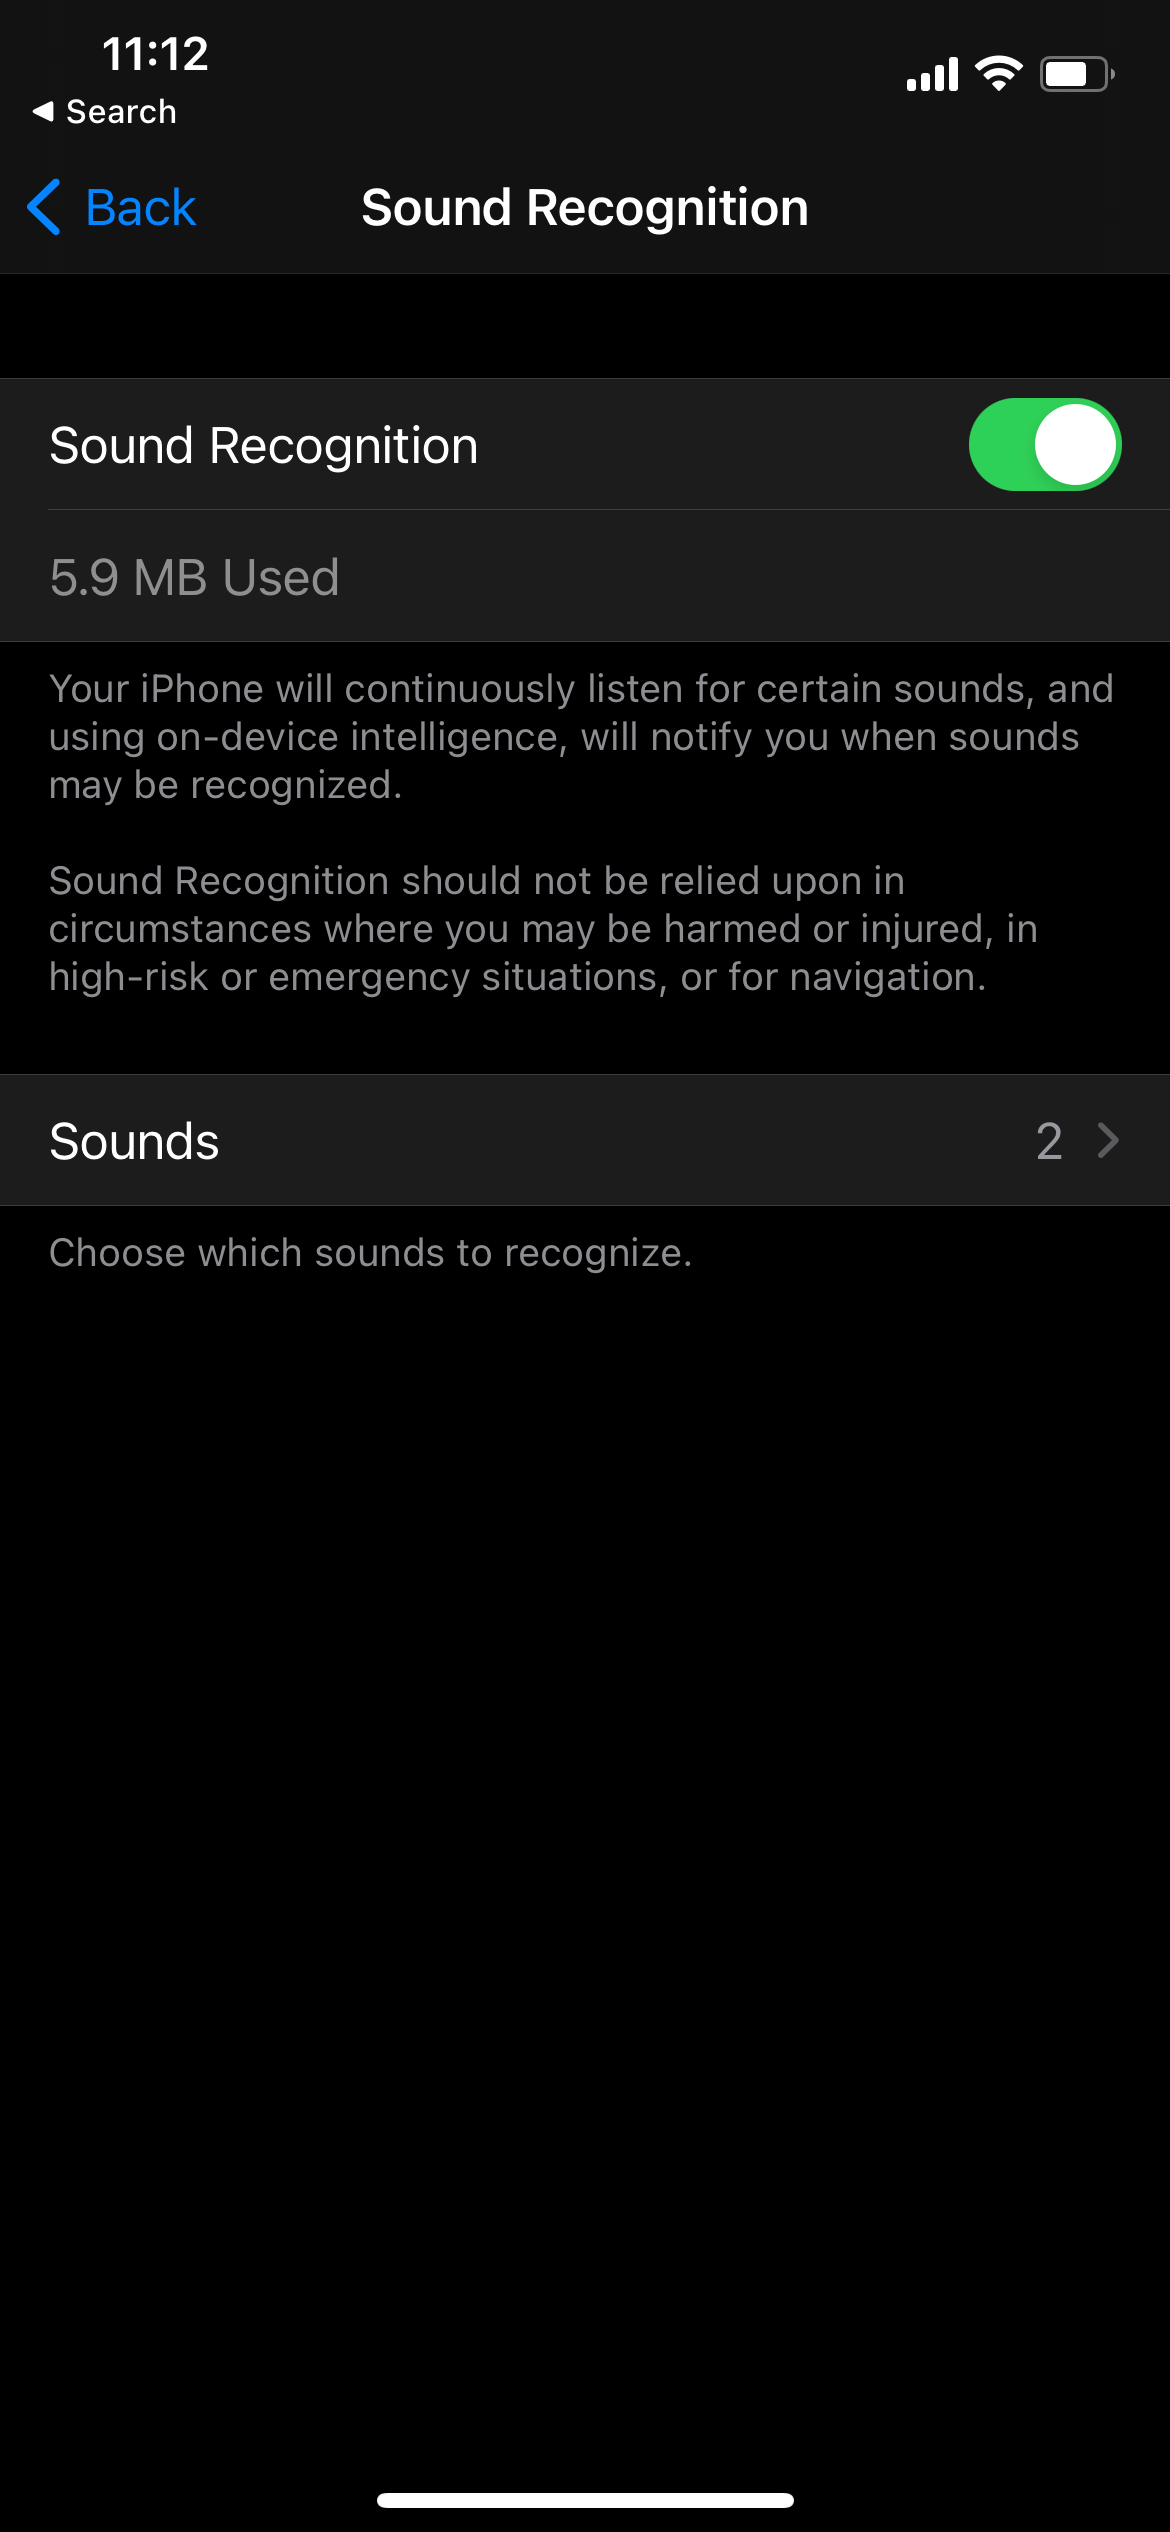 Sound Recognition Toggle Switch On